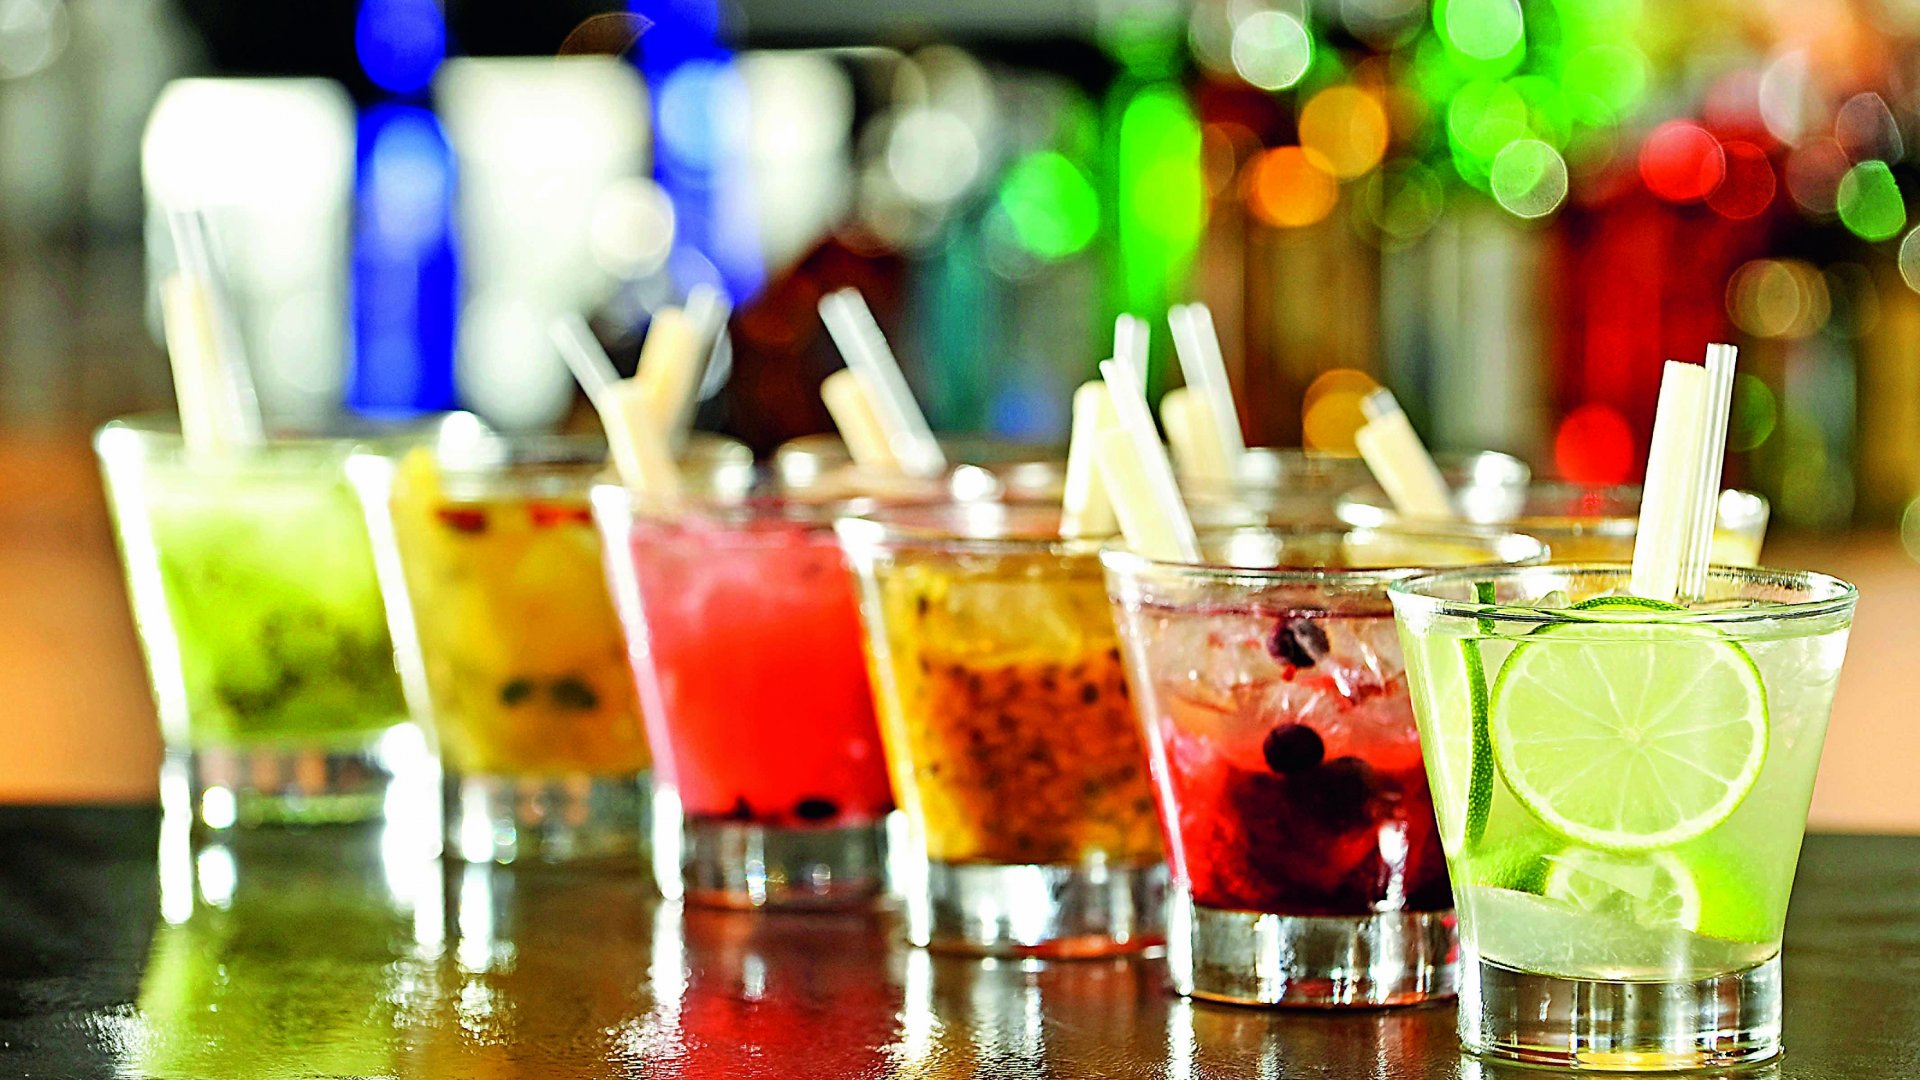 HD Wallpaper Colorful Drink 1920x1080